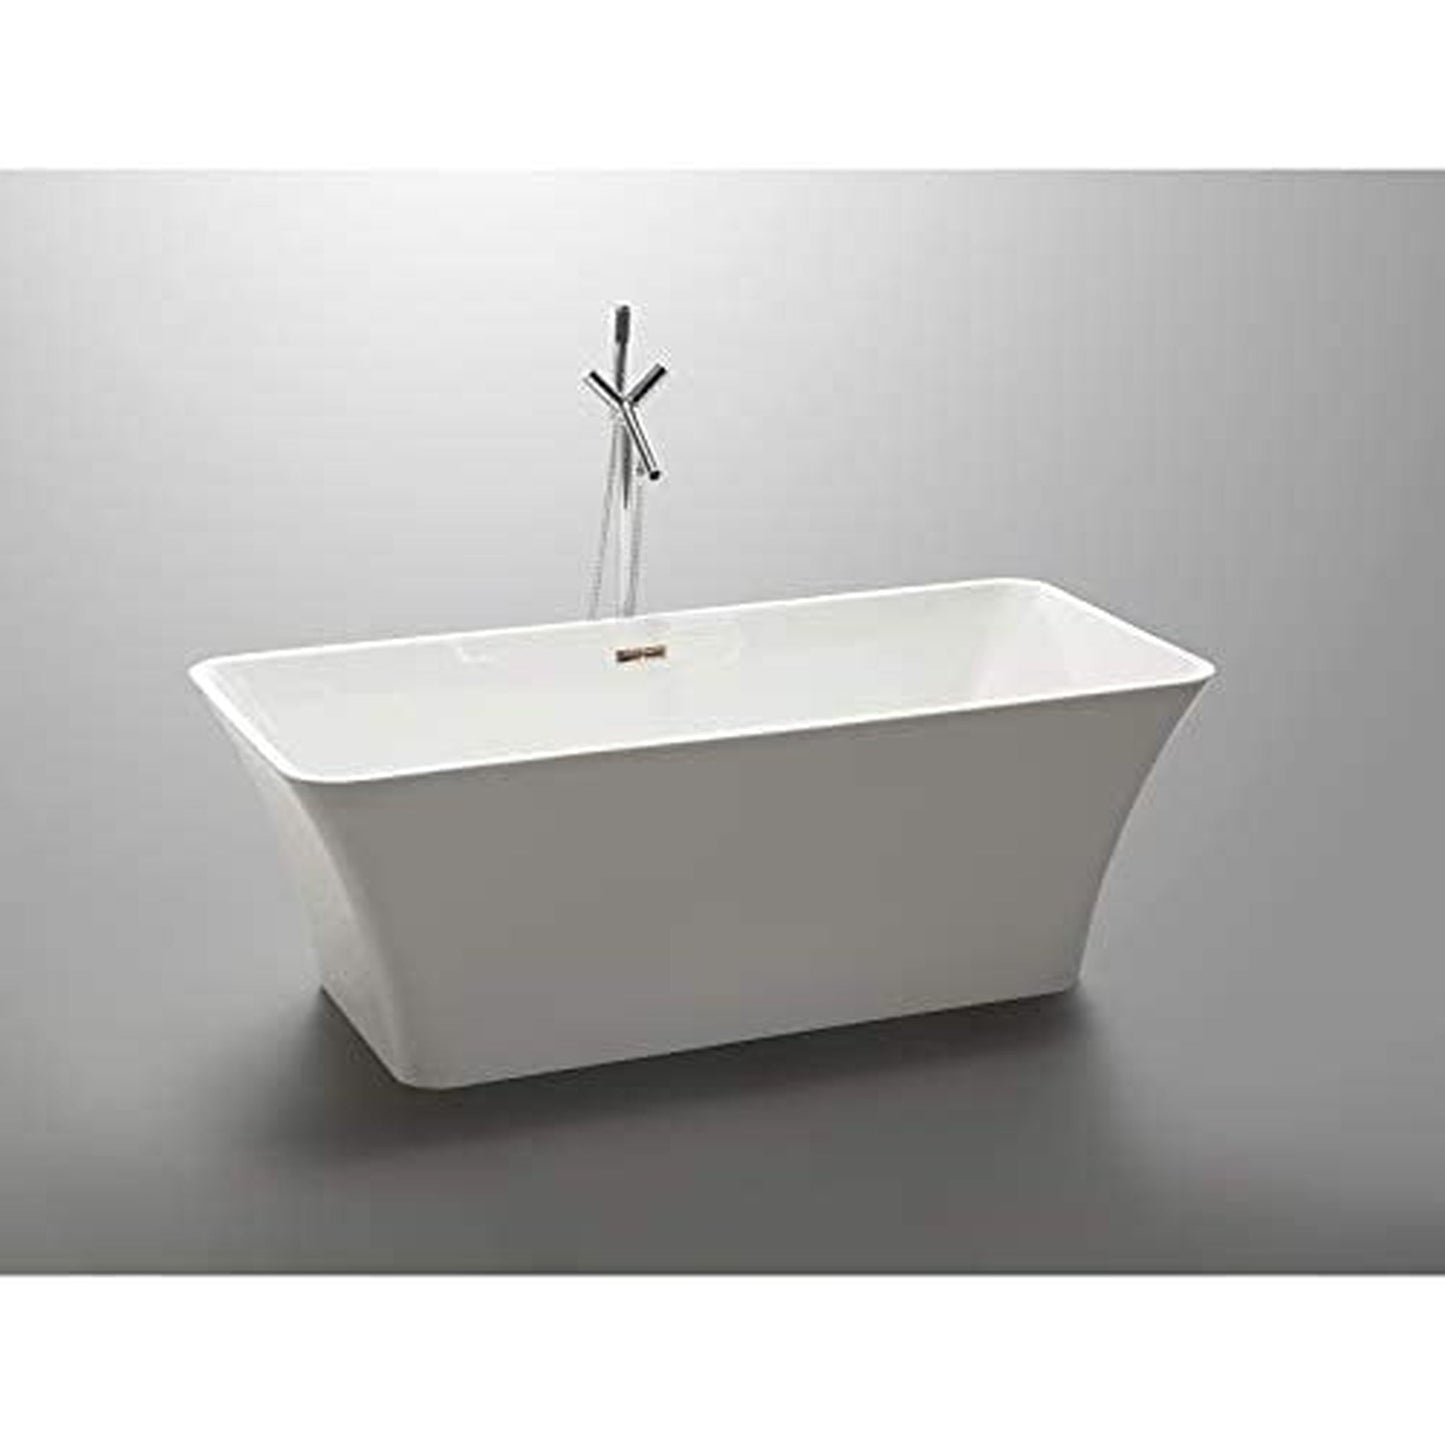 Vanity Art 67" White Acrylic Modern Stand Alone Rectangular Freestanding Soaking Bathtub With Slotted Overflow and Pop-up Drain